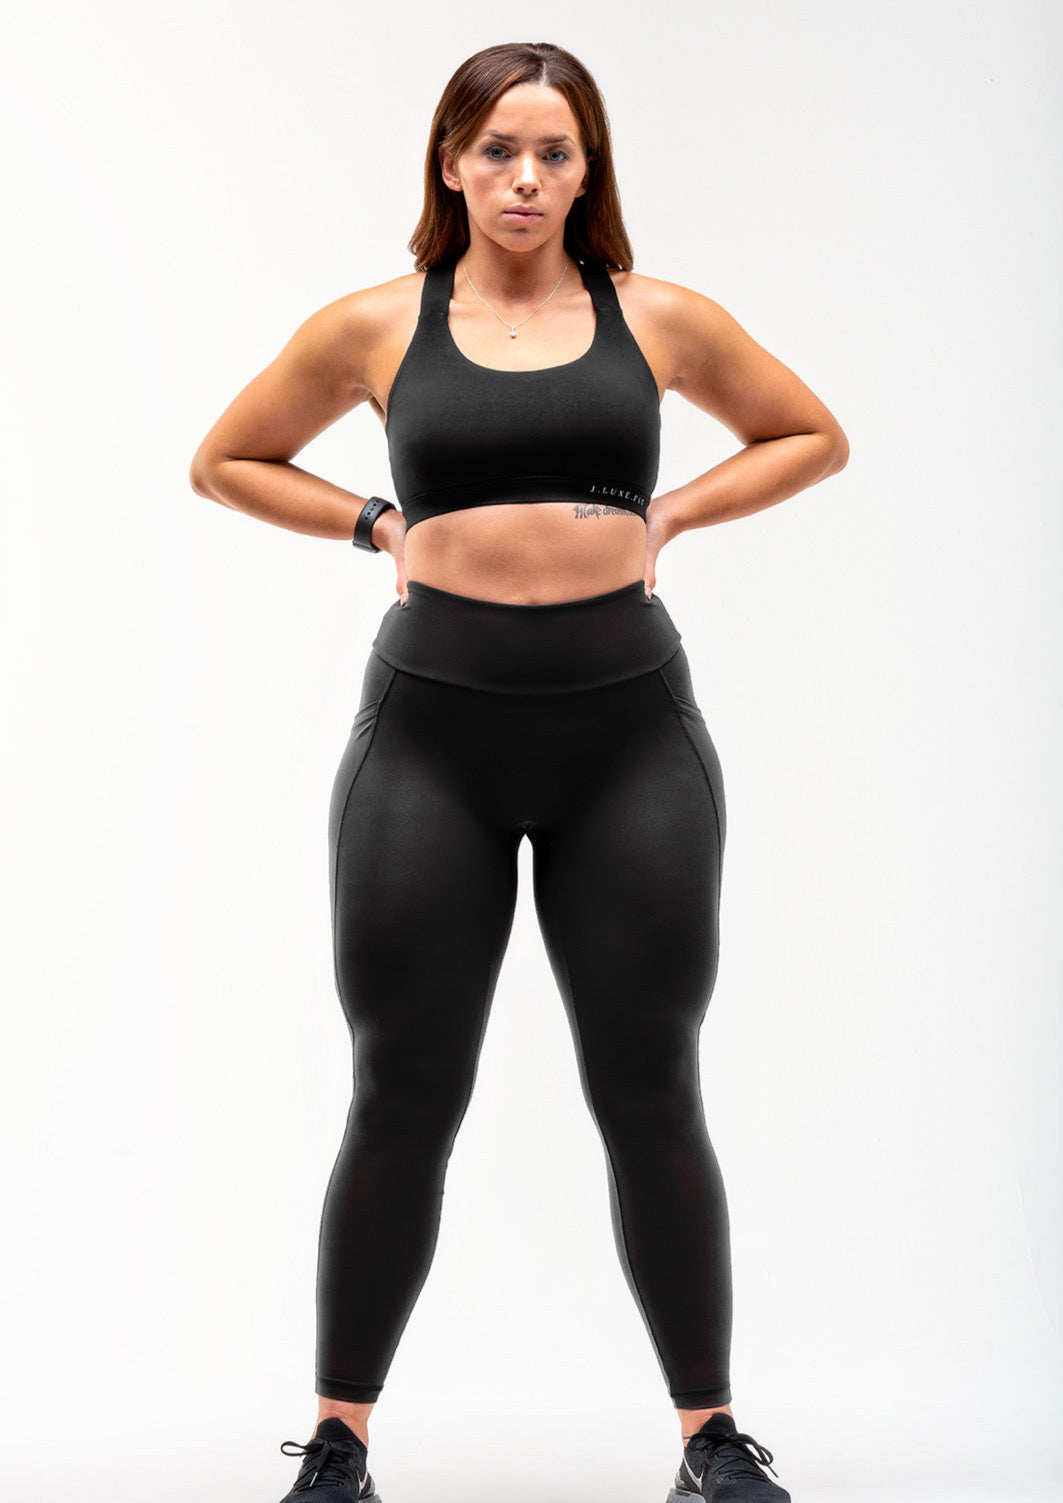 Luxe Support Black Sports Bra - J.LUXE.FIT